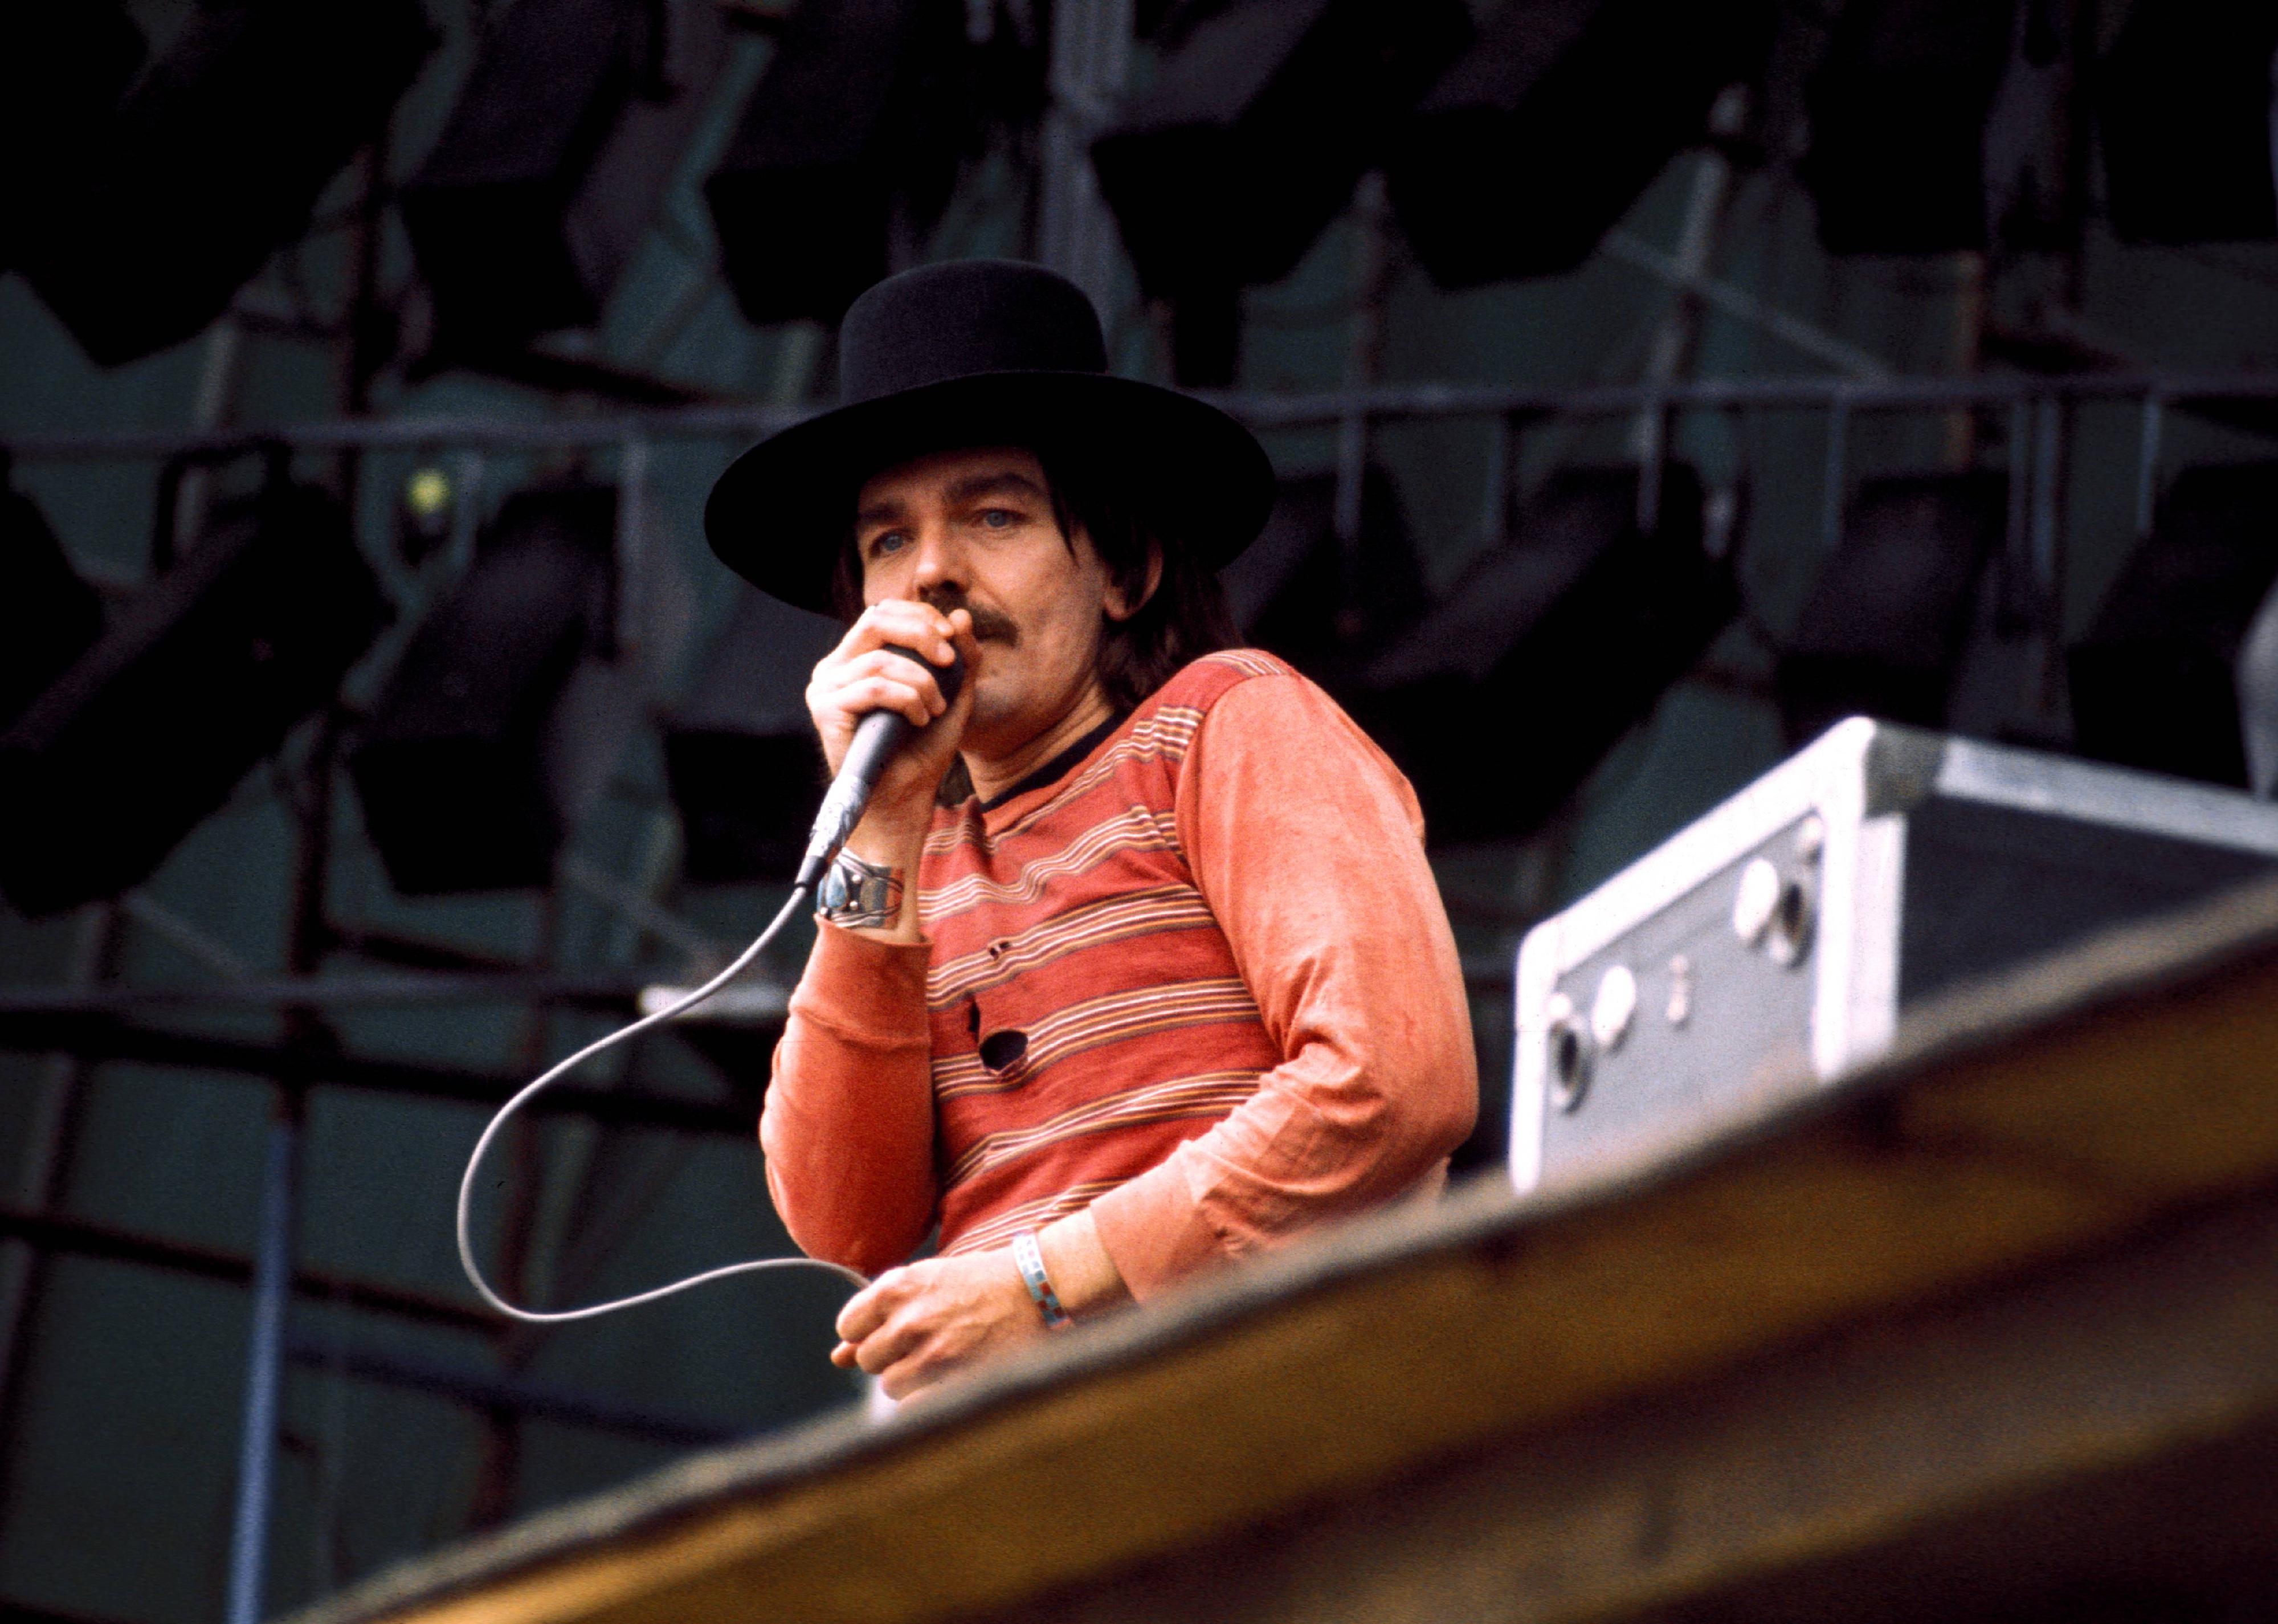 Captain Beefheart performing live onstage.